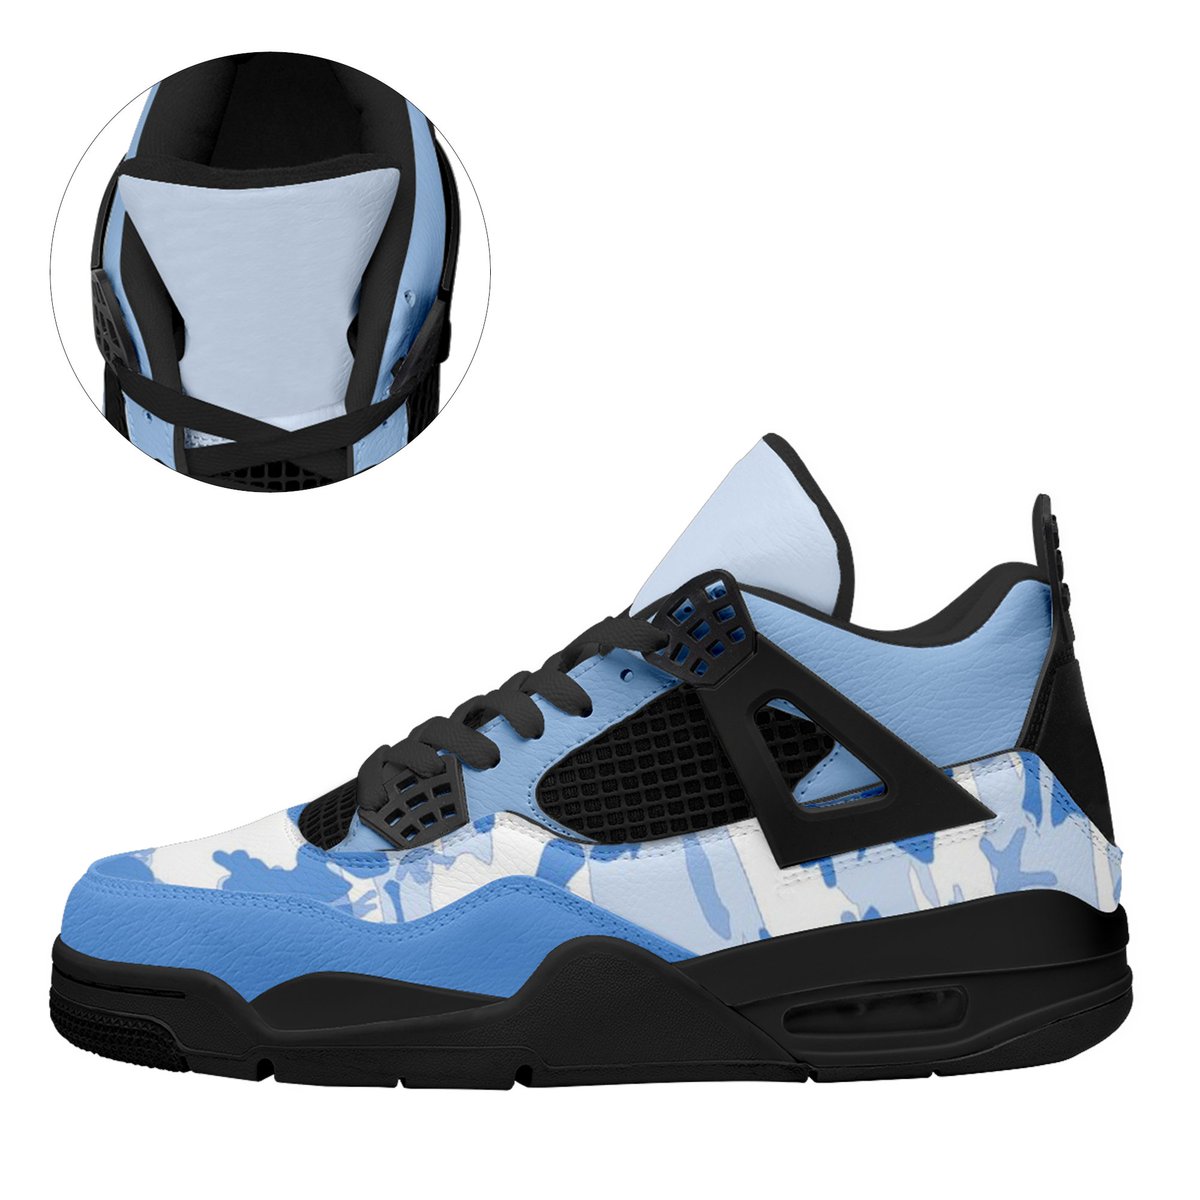 Elevate Your Style with Custom Air Jordan Sneakers
#printondemand
#coolcustomize
#customshoe
#customsneaker
#CustomizeYourJordans
#SneakerCustomization
#AirJordanFashion
#SoleExpression
#CustomizeYourStyle